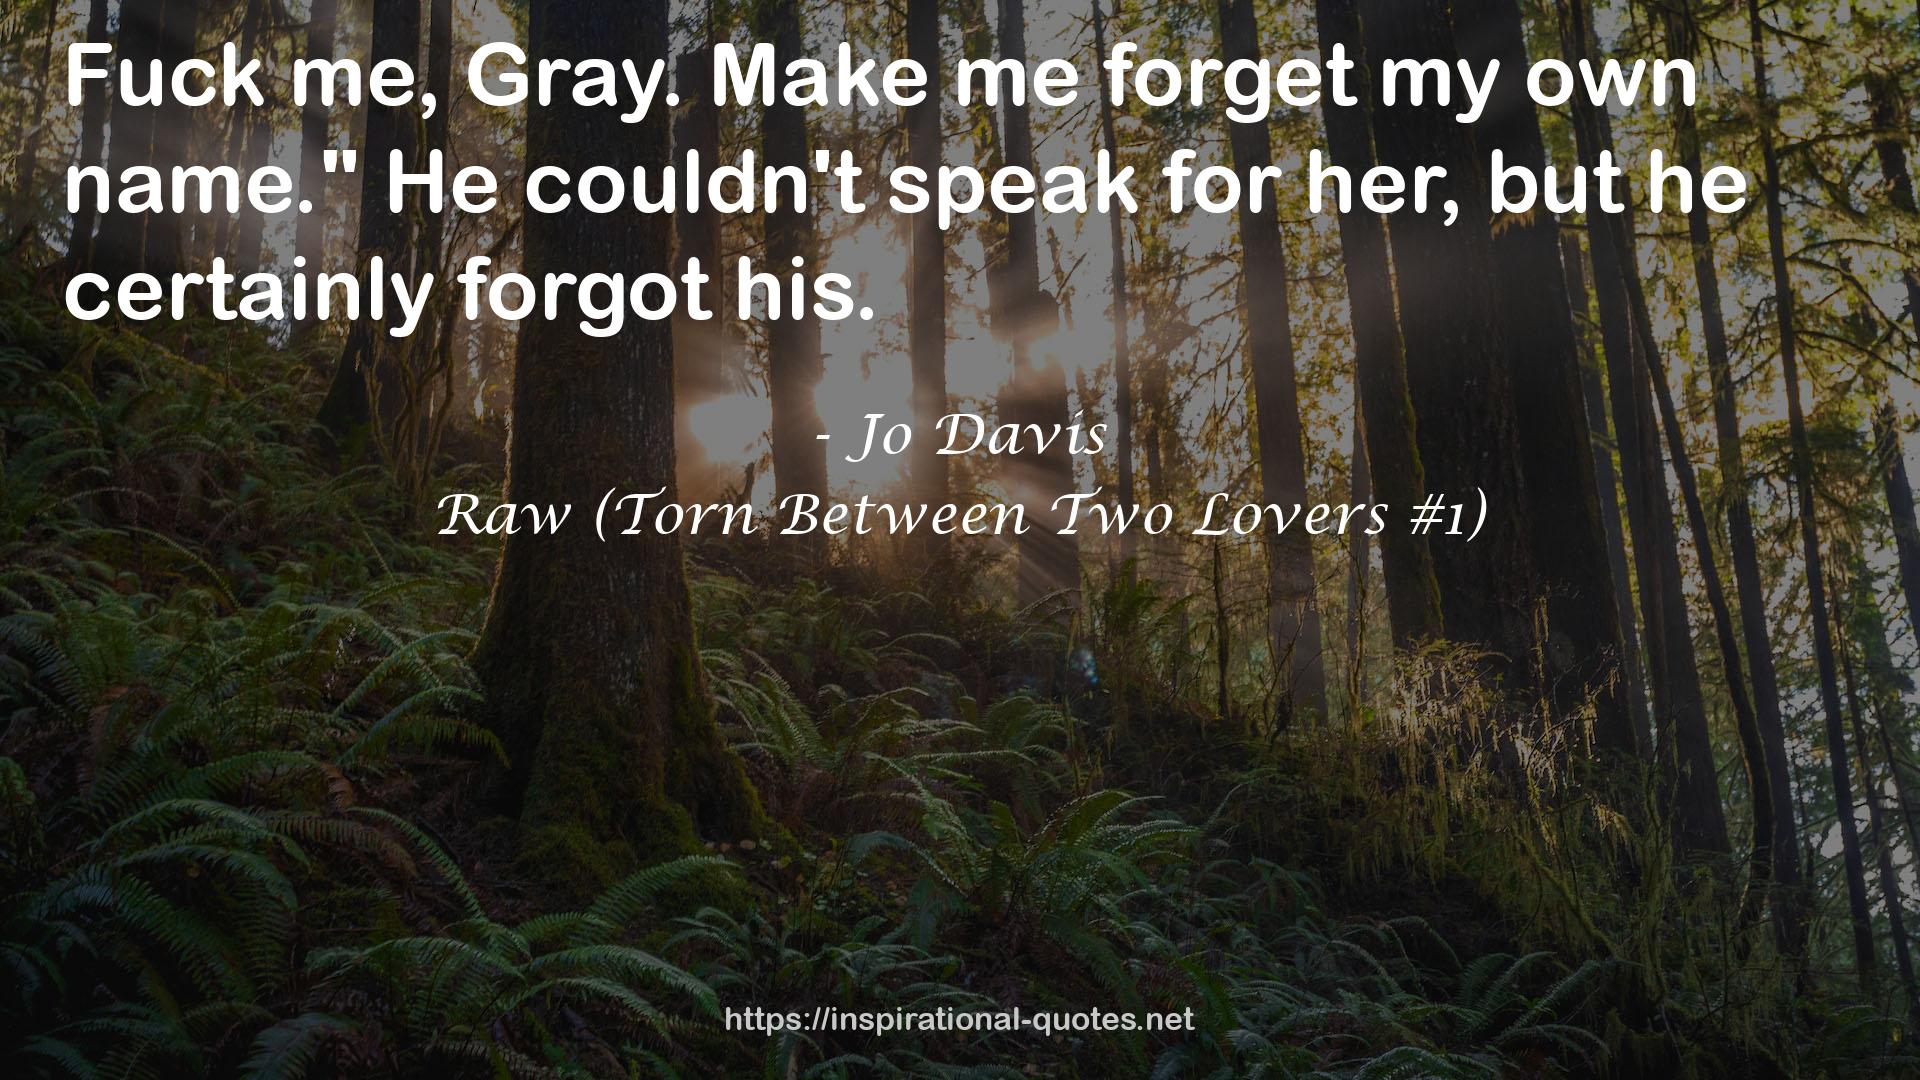 Raw (Torn Between Two Lovers #1) QUOTES